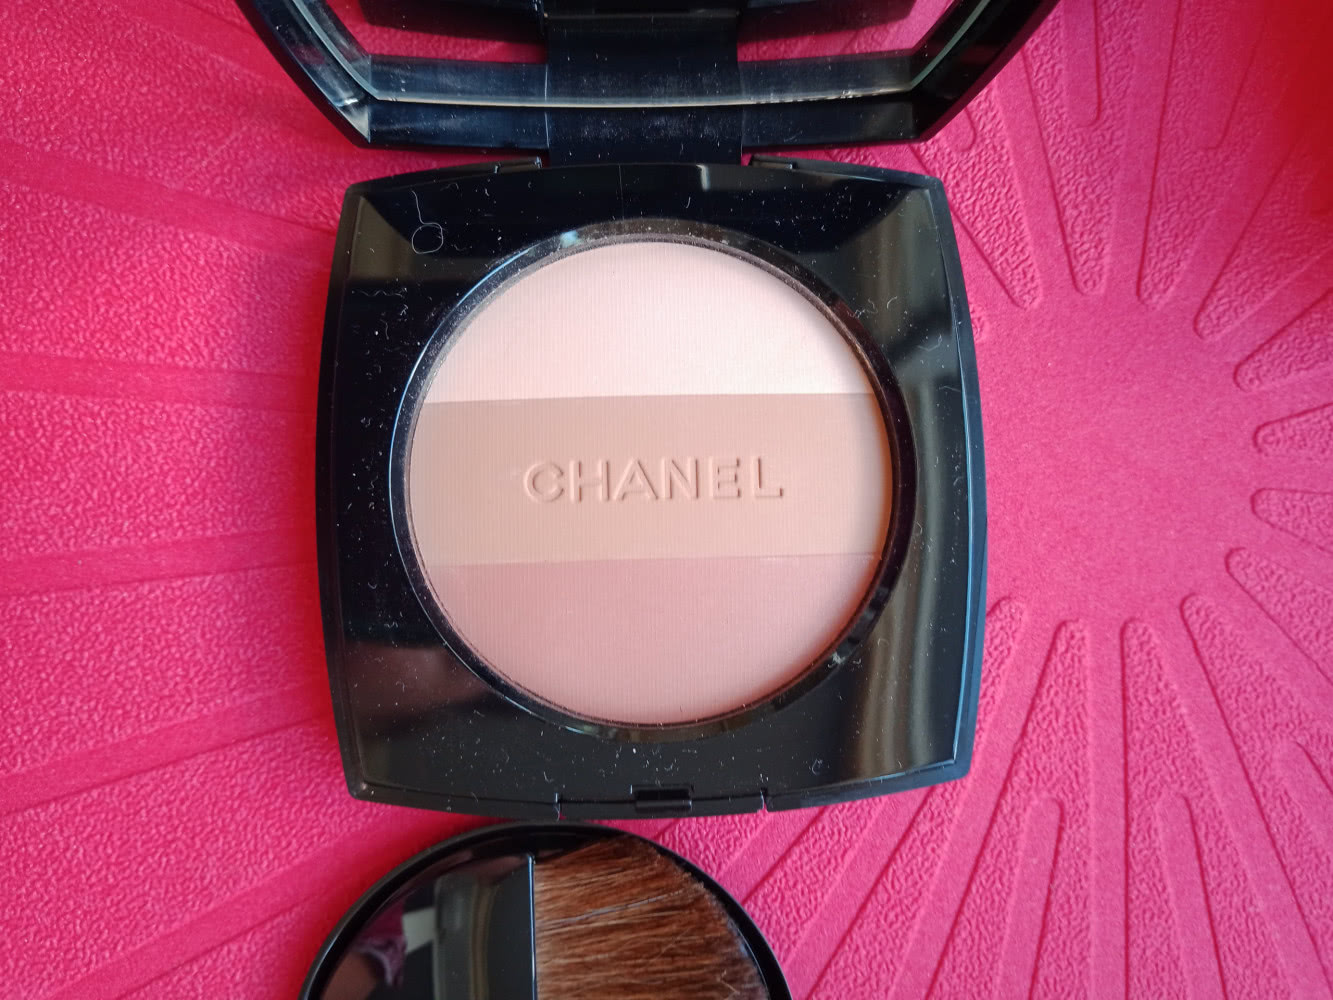 Chanel Les Beiges Healthy Glow Multi-Colour SPF 15/ PA ++ оттенок 02